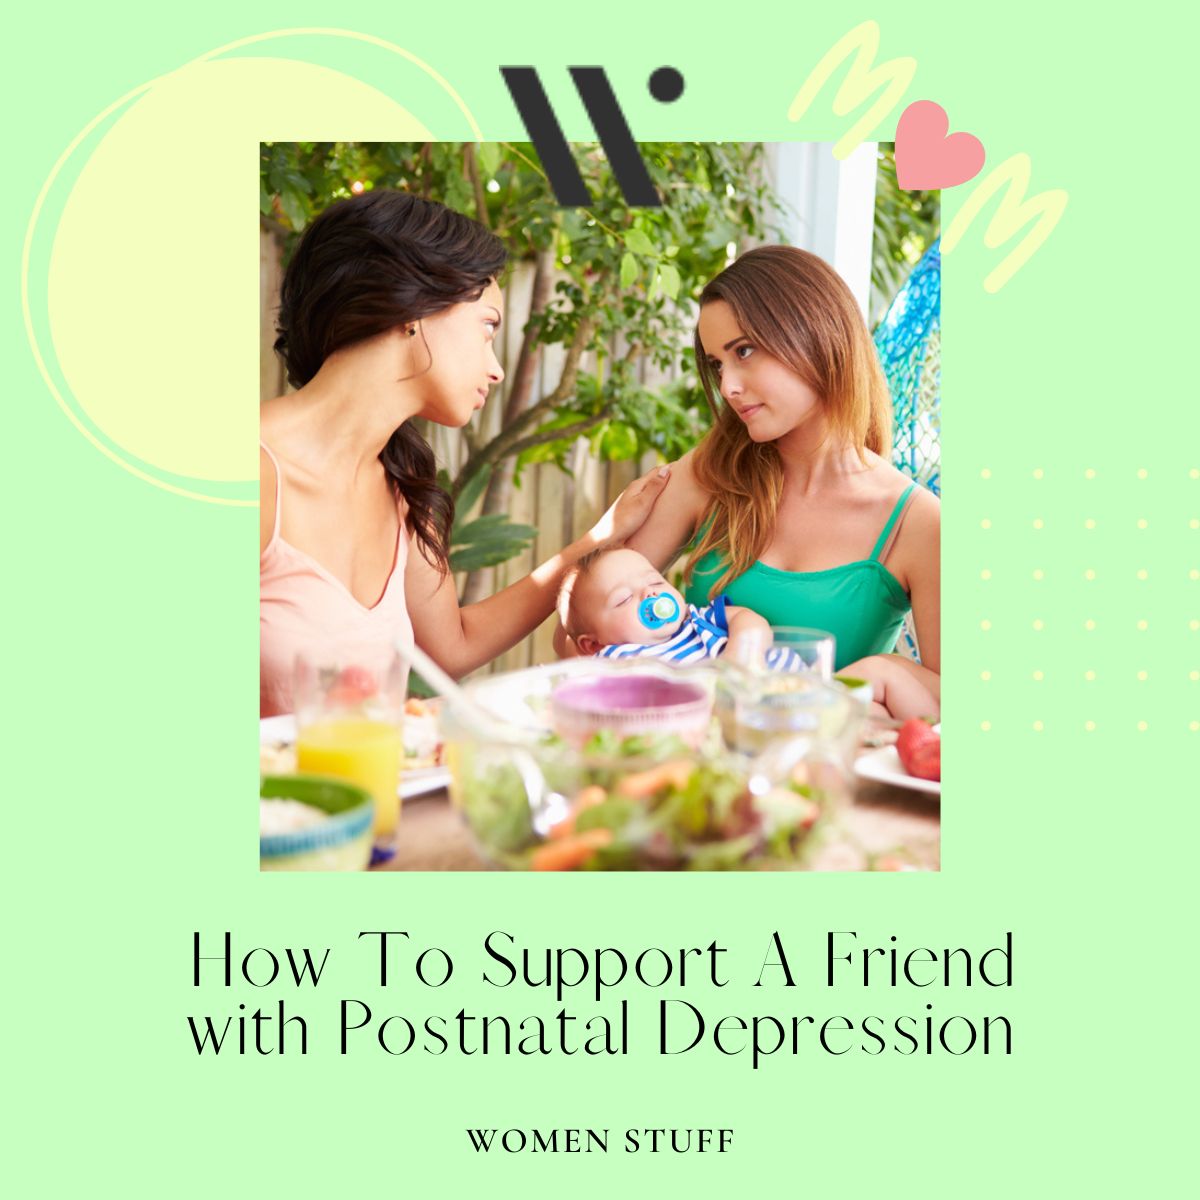 How To Support A Friend with Postnatal Depression Banner Image